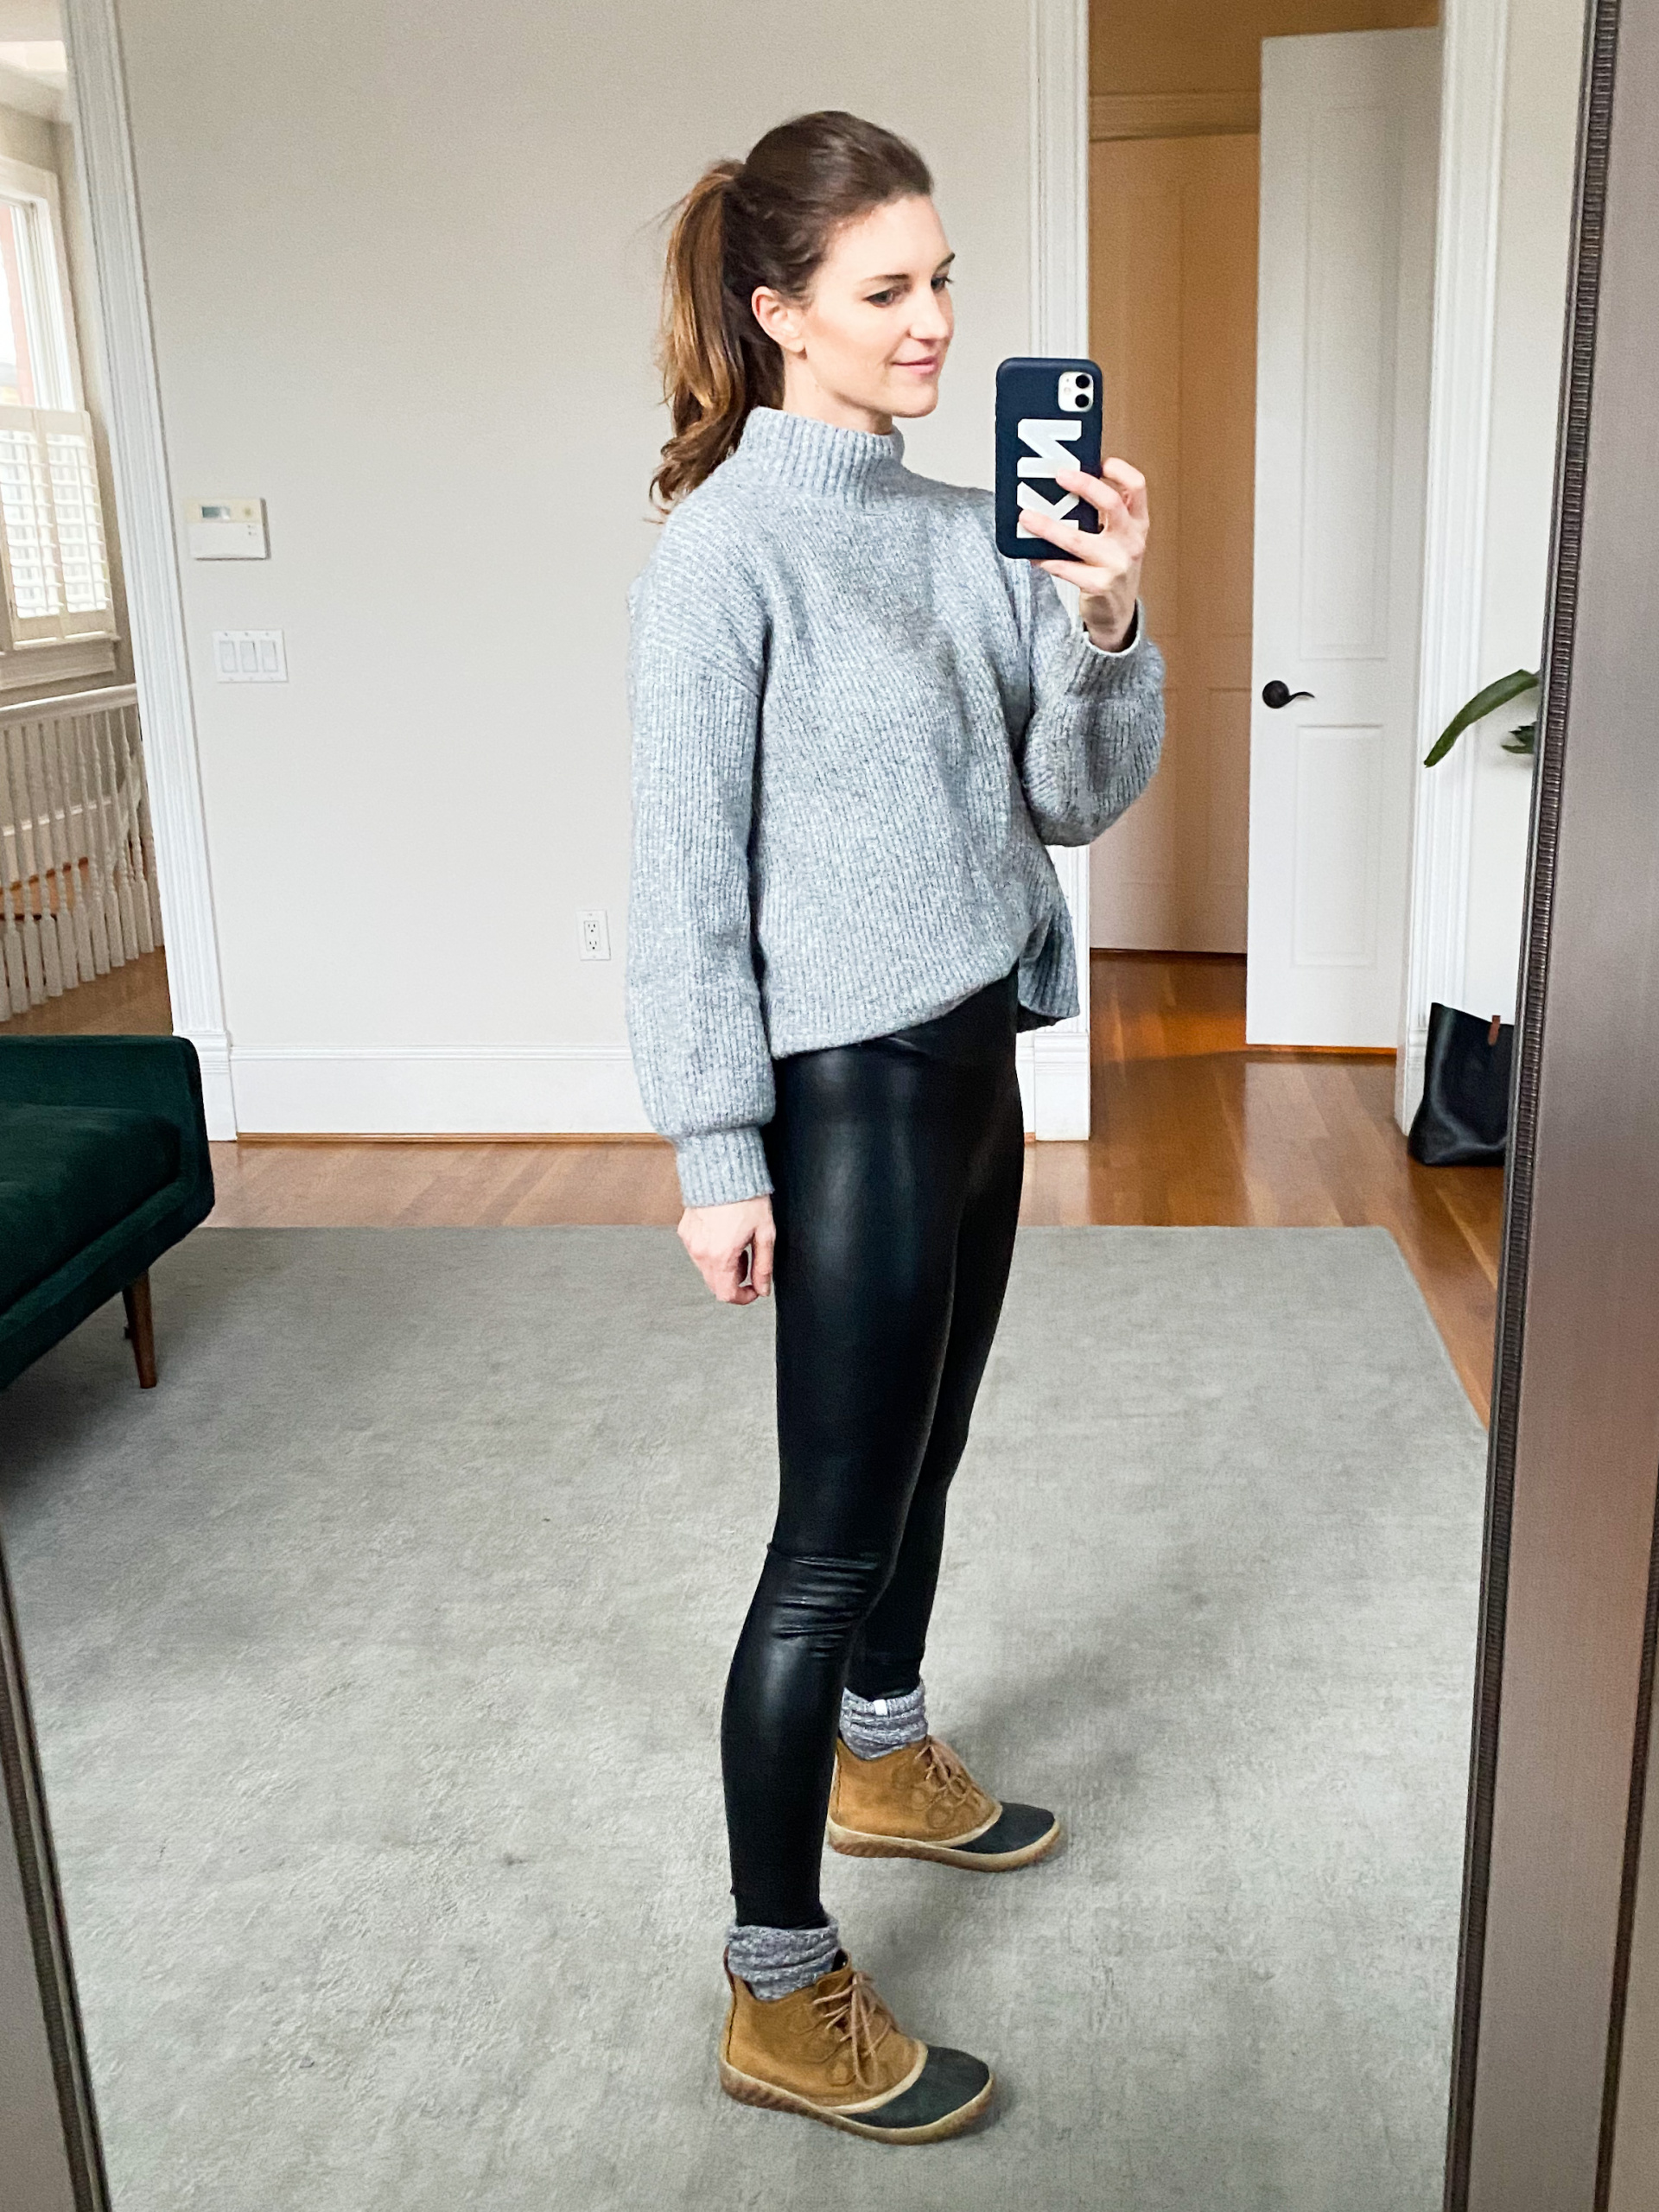 Every day style, casual looks for winter, winter outfit ideas by finding beauty mom, winter boots, sorel boots 